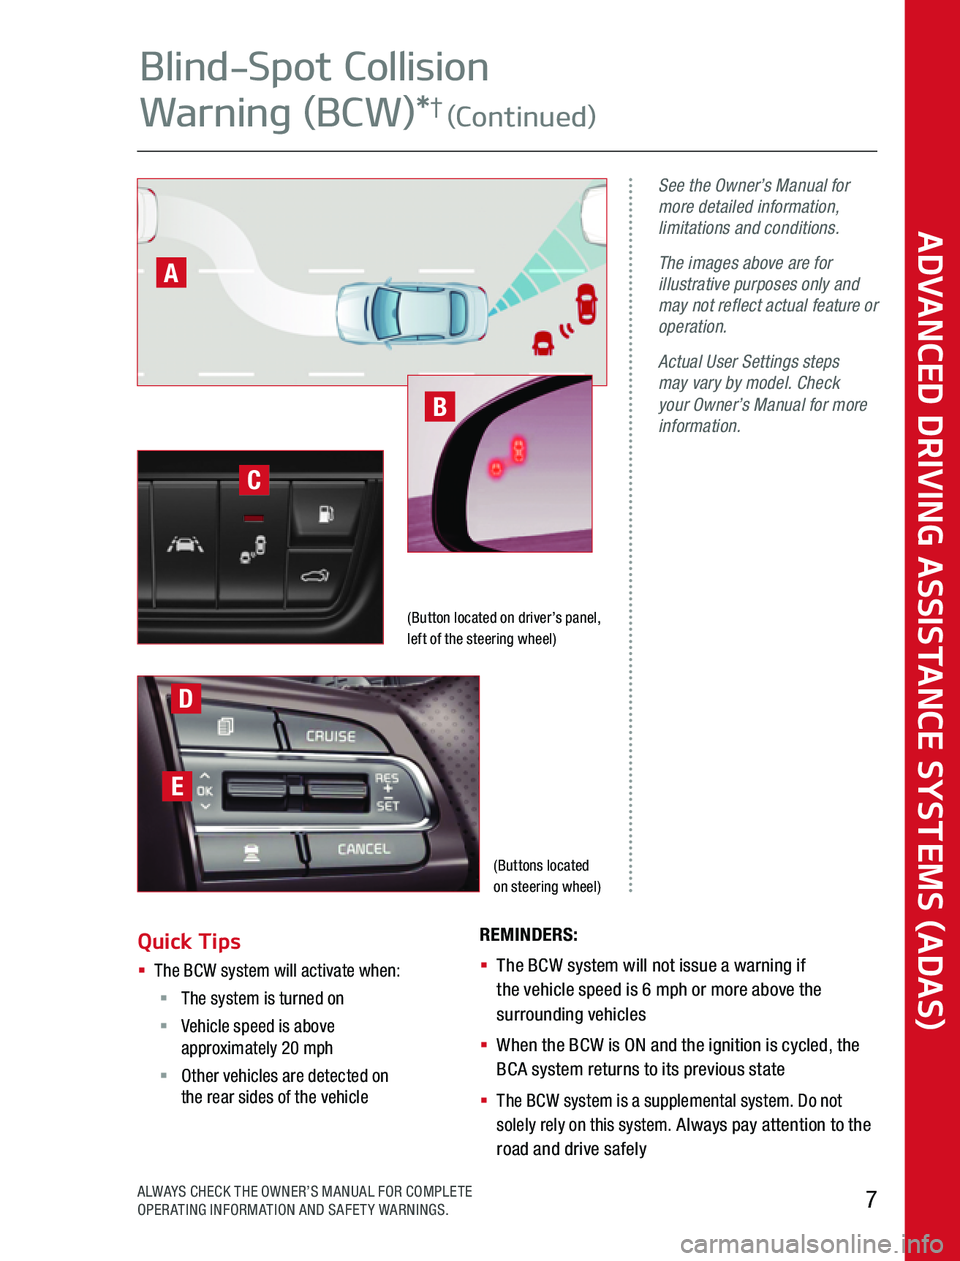 KIA NIRO 2020  Advanced Driving Assistance System (Buttons located  on steering wheel)
See the Owner’s Manual for more detailed information, limitations and conditions.
The images above are for illustrative purposes only and may not reflect actual 